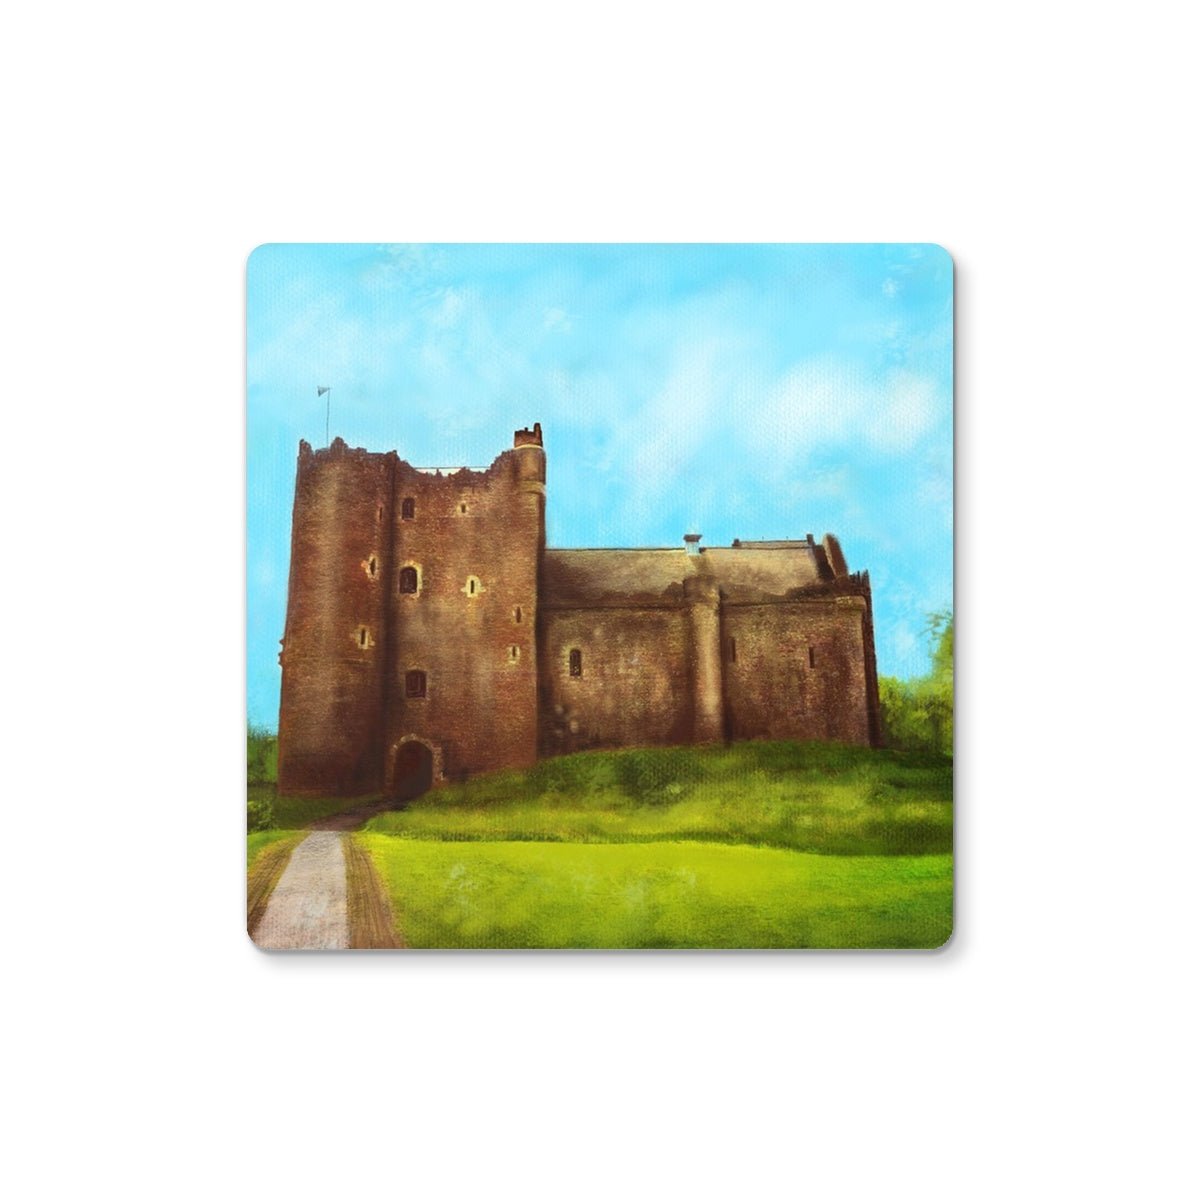 Doune Castle Art Gifts Coaster-Coasters-Scottish Castles Art Gallery-2 Coasters-Paintings, Prints, Homeware, Art Gifts From Scotland By Scottish Artist Kevin Hunter